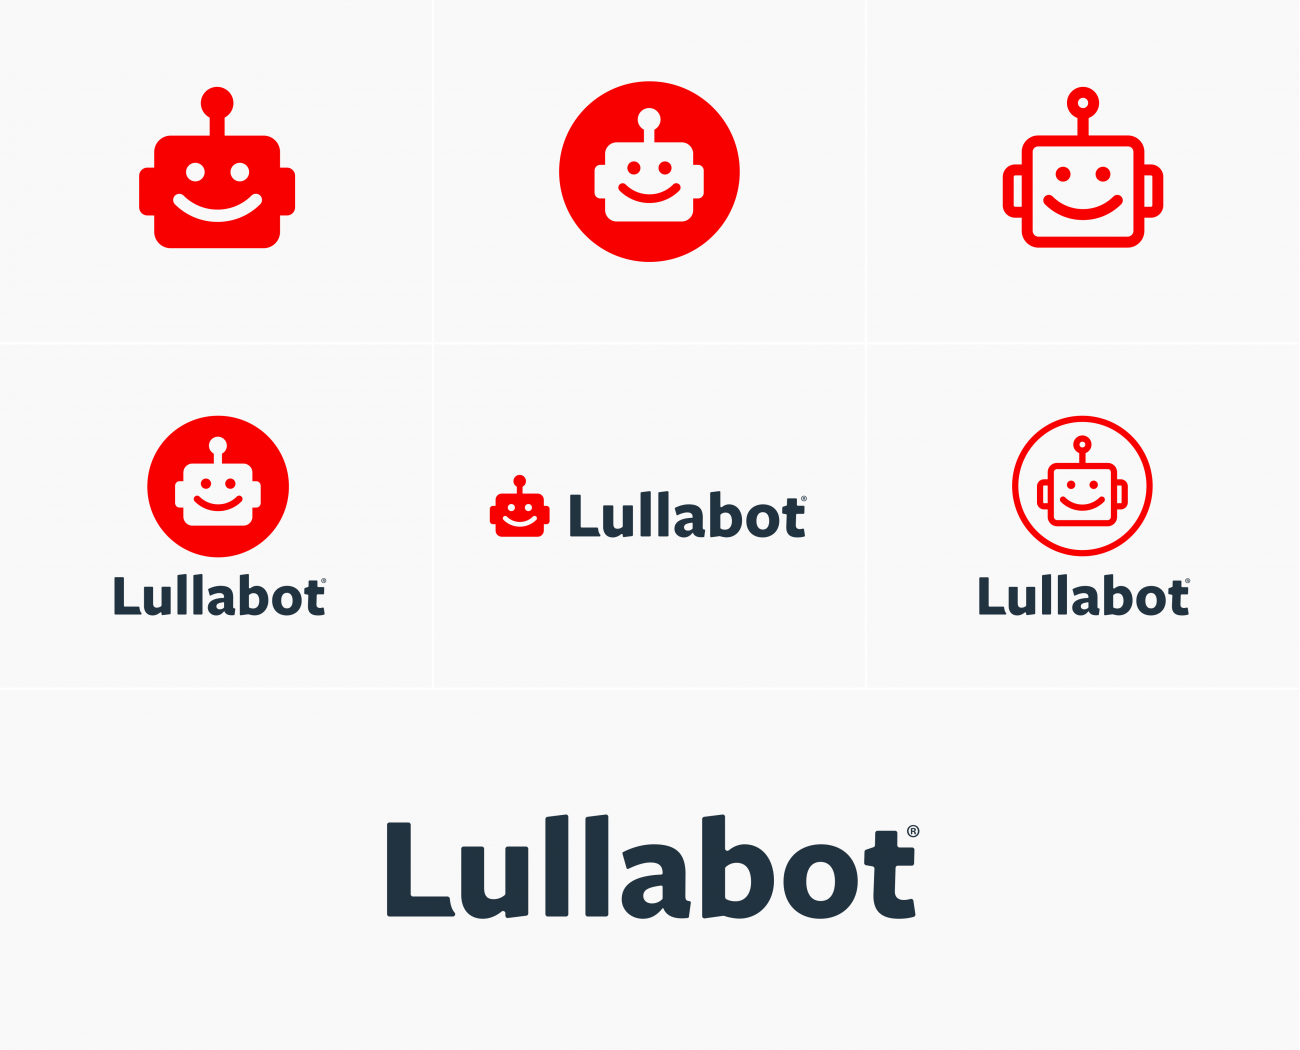 Various permutations of the Lullabot identity including solid robot head, circle with robot head inside, lullabot text, and outlines